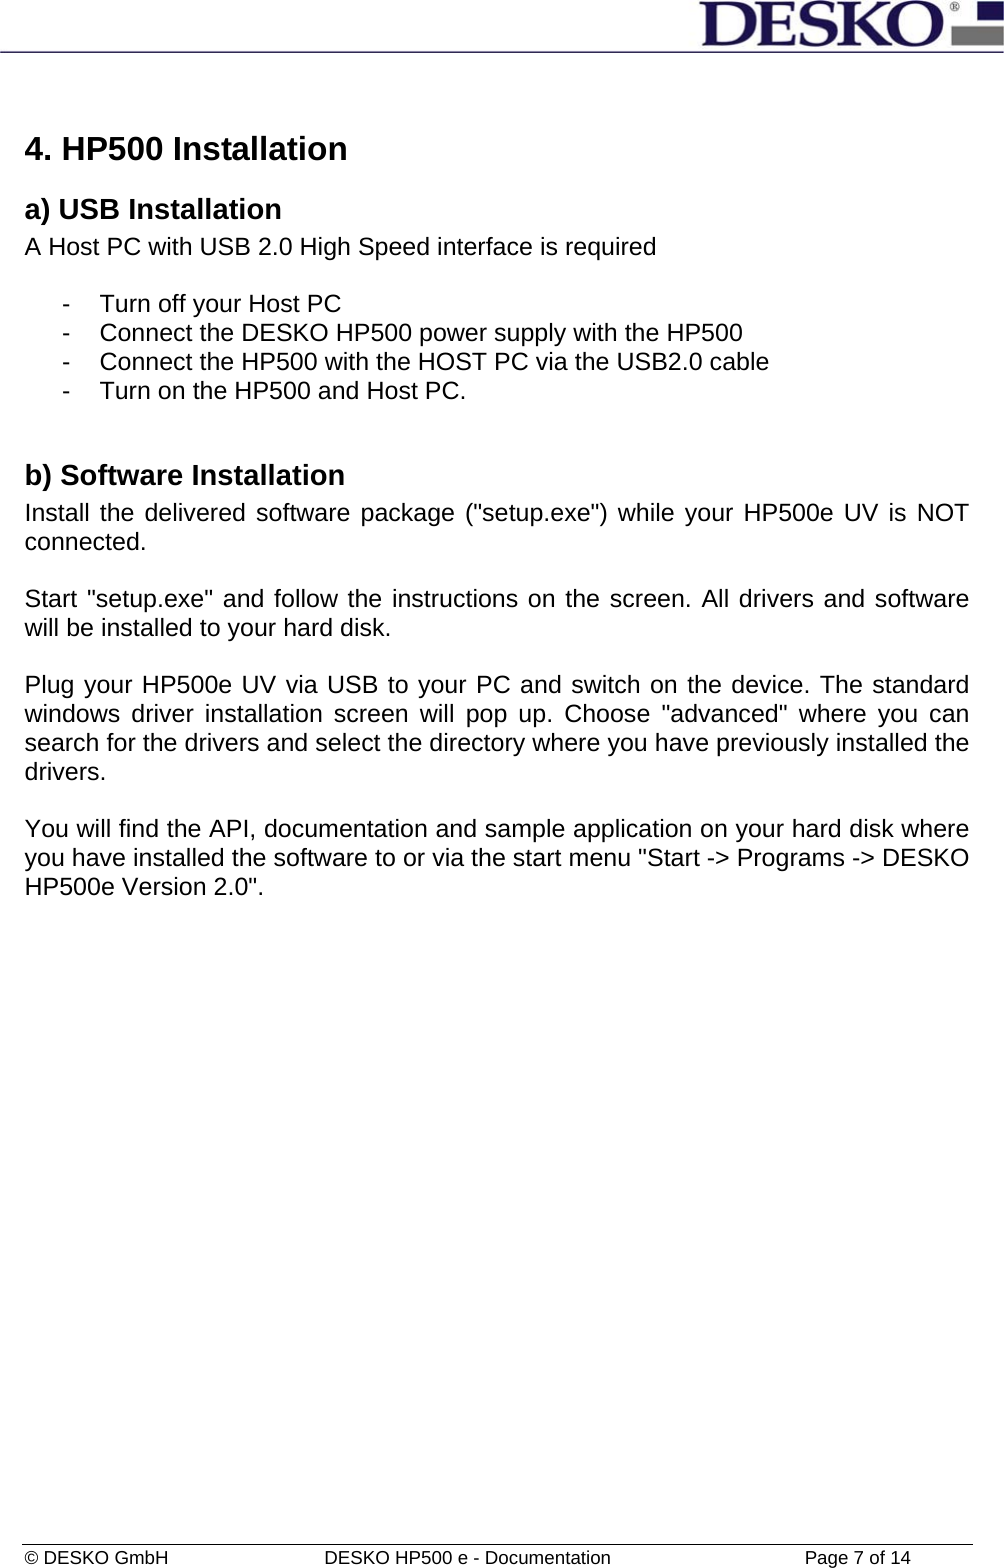  © DESKO GmbH   DESKO HP500 e - Documentation                  Page 7 of 14  4. HP500 Installation a) USB Installation A Host PC with USB 2.0 High Speed interface is required  -  Turn off your Host PC -  Connect the DESKO HP500 power supply with the HP500 -  Connect the HP500 with the HOST PC via the USB2.0 cable -  Turn on the HP500 and Host PC.  b) Software Installation Install the delivered software package (&quot;setup.exe&quot;) while your HP500e UV is NOT connected.   Start &quot;setup.exe&quot; and follow the instructions on the screen. All drivers and software will be installed to your hard disk.   Plug your HP500e UV via USB to your PC and switch on the device. The standard windows driver installation screen will pop up. Choose &quot;advanced&quot; where you can search for the drivers and select the directory where you have previously installed the drivers.     You will find the API, documentation and sample application on your hard disk where you have installed the software to or via the start menu &quot;Start -&gt; Programs -&gt; DESKO HP500e Version 2.0&quot;. 